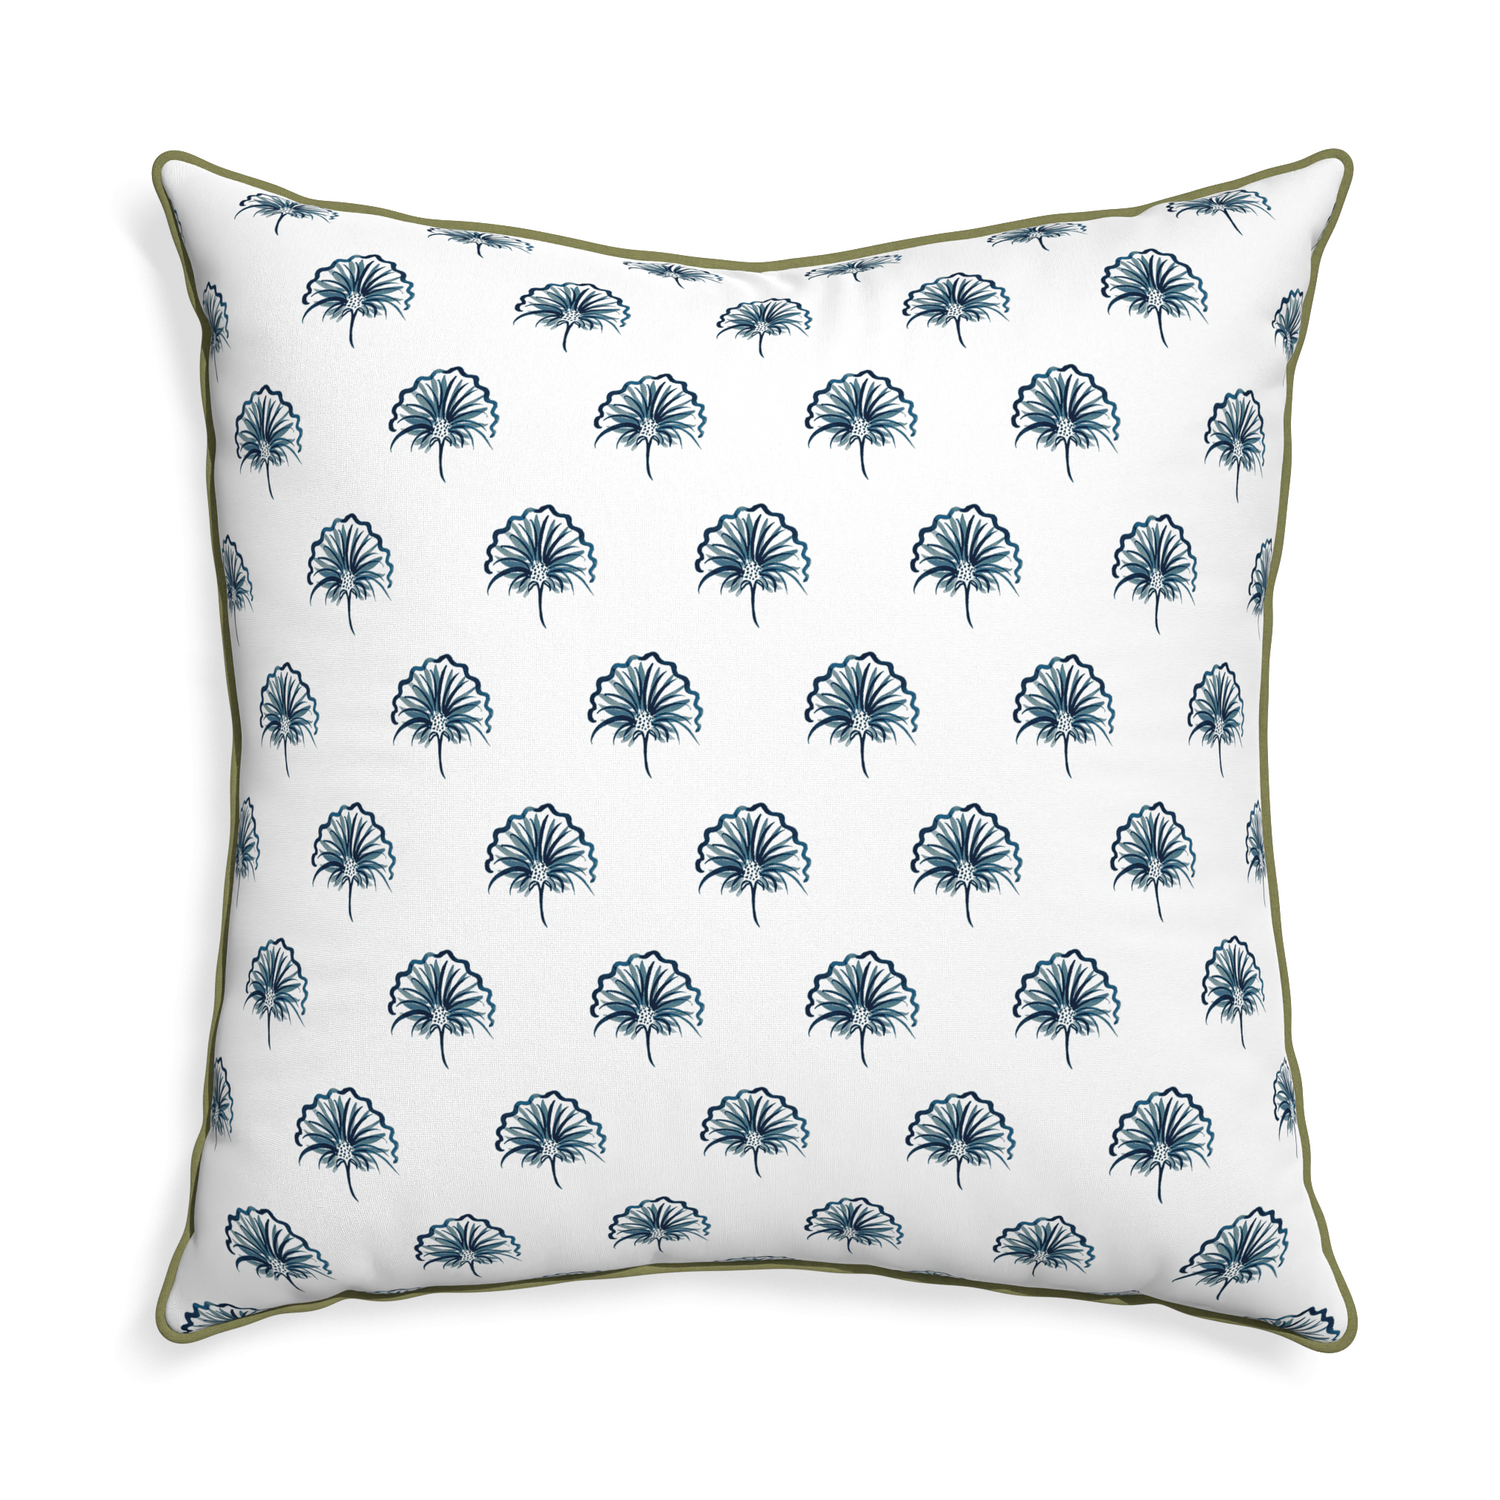 Euro-sham penelope midnight custom pillow with moss piping on white background